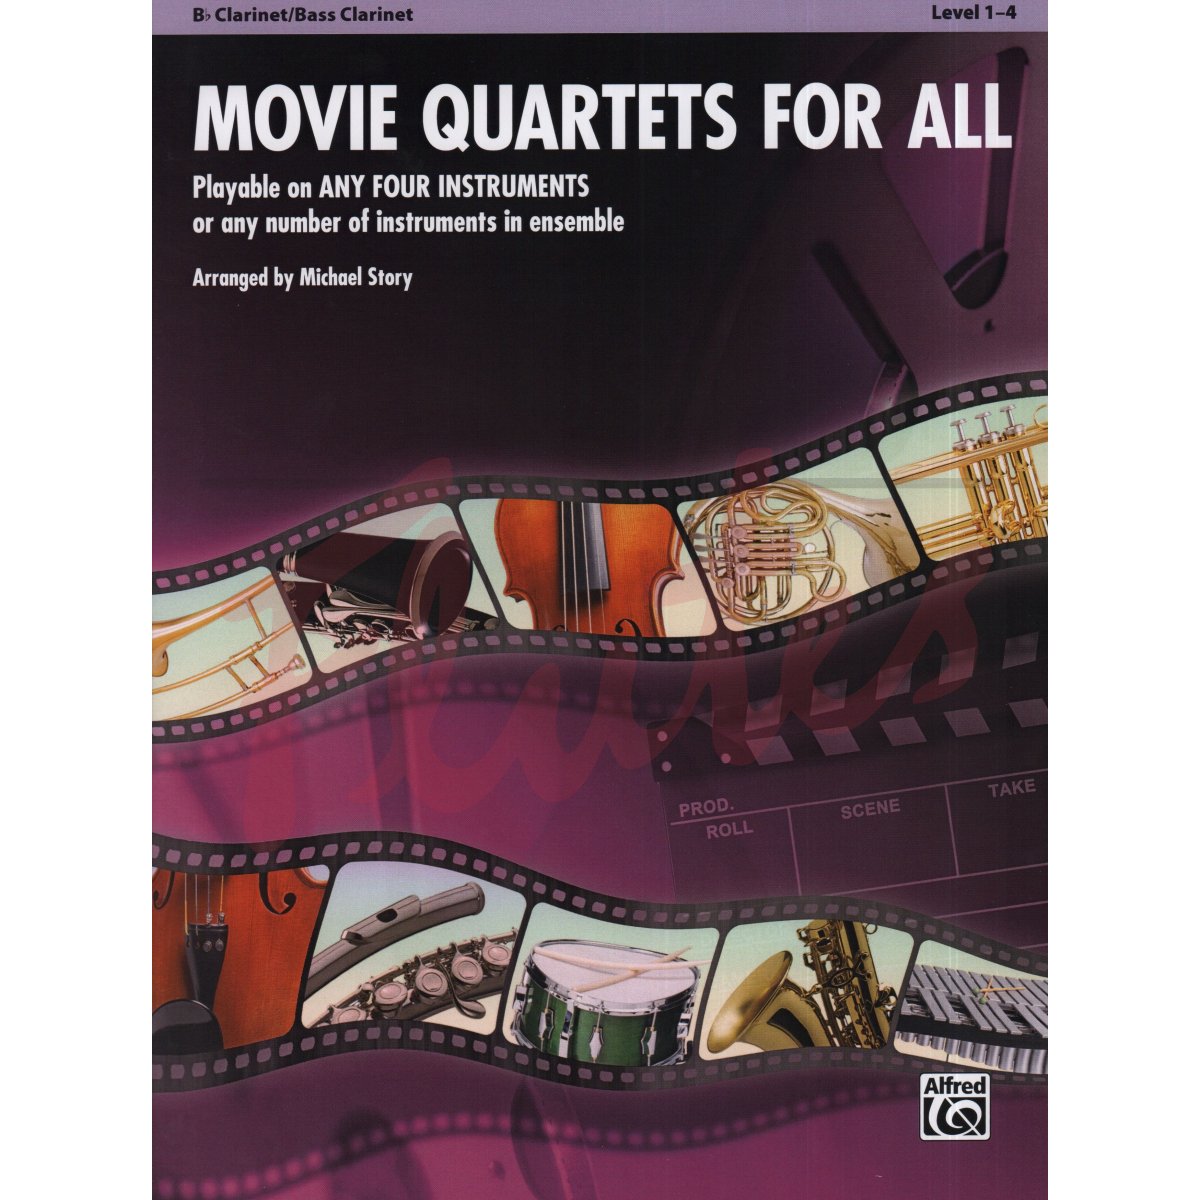 Movie Quartets for All for Clarinet/Bass Clarinet